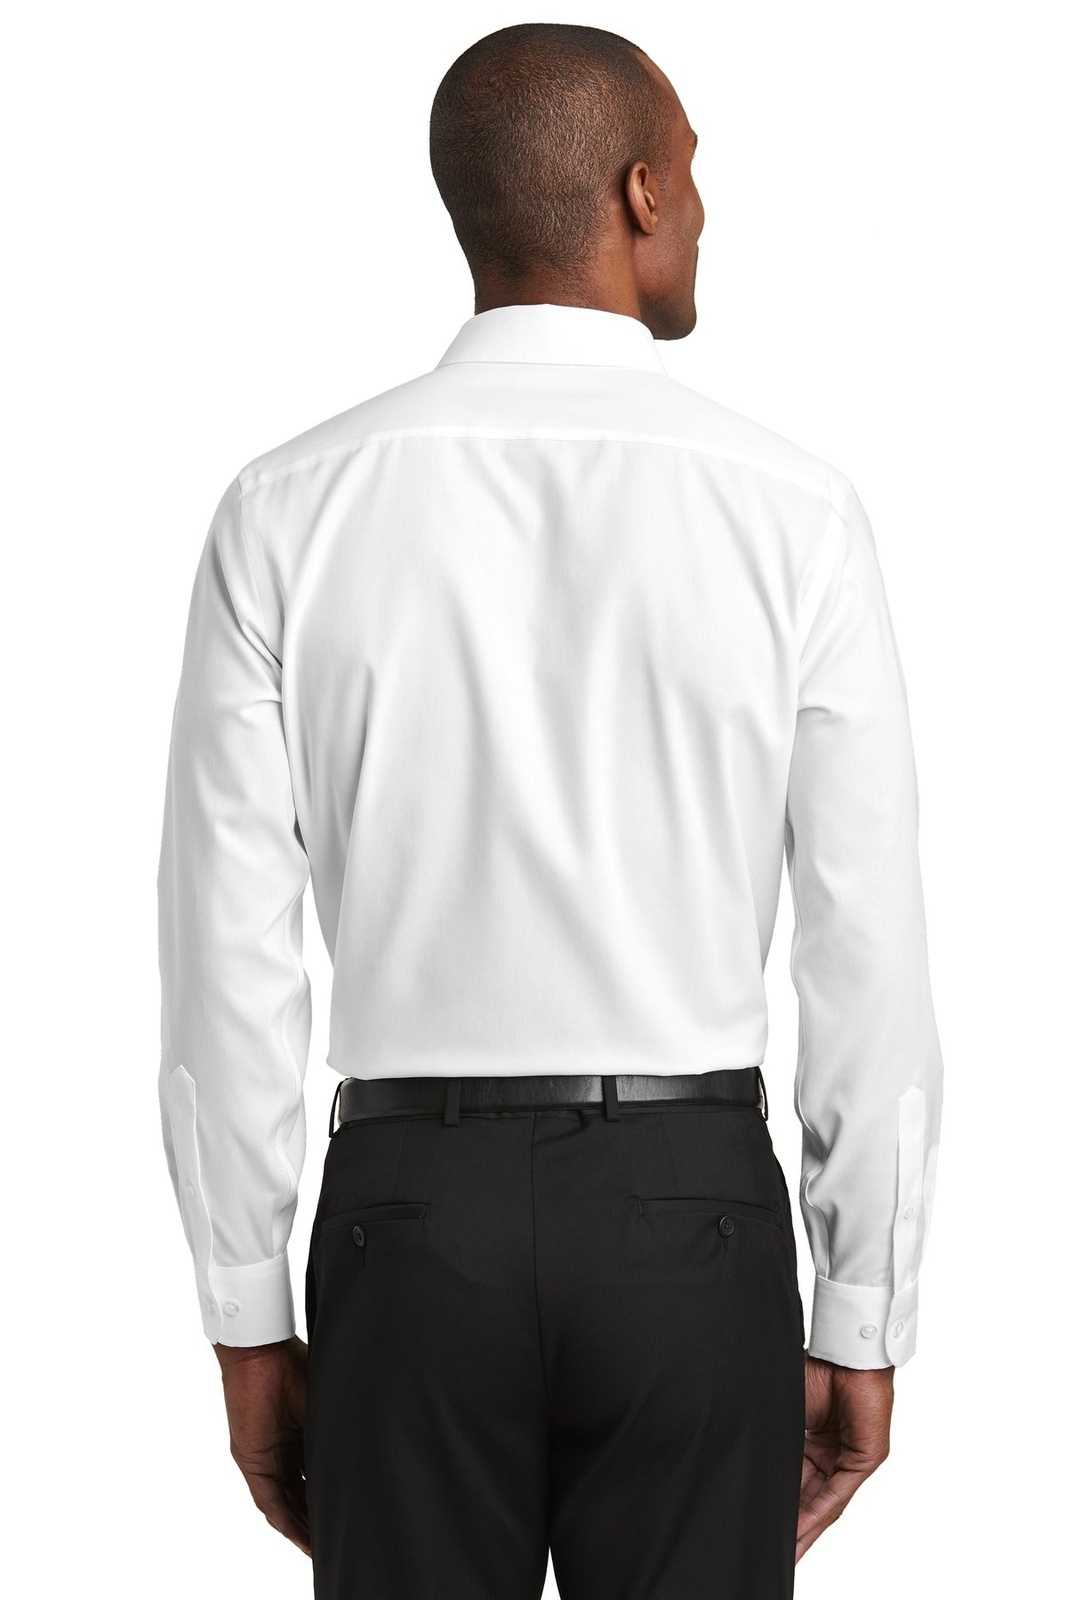 Red House RH620 Slim Fit Pinpoint Oxford Non-Iron Shirt - White - HIT a Double - 1